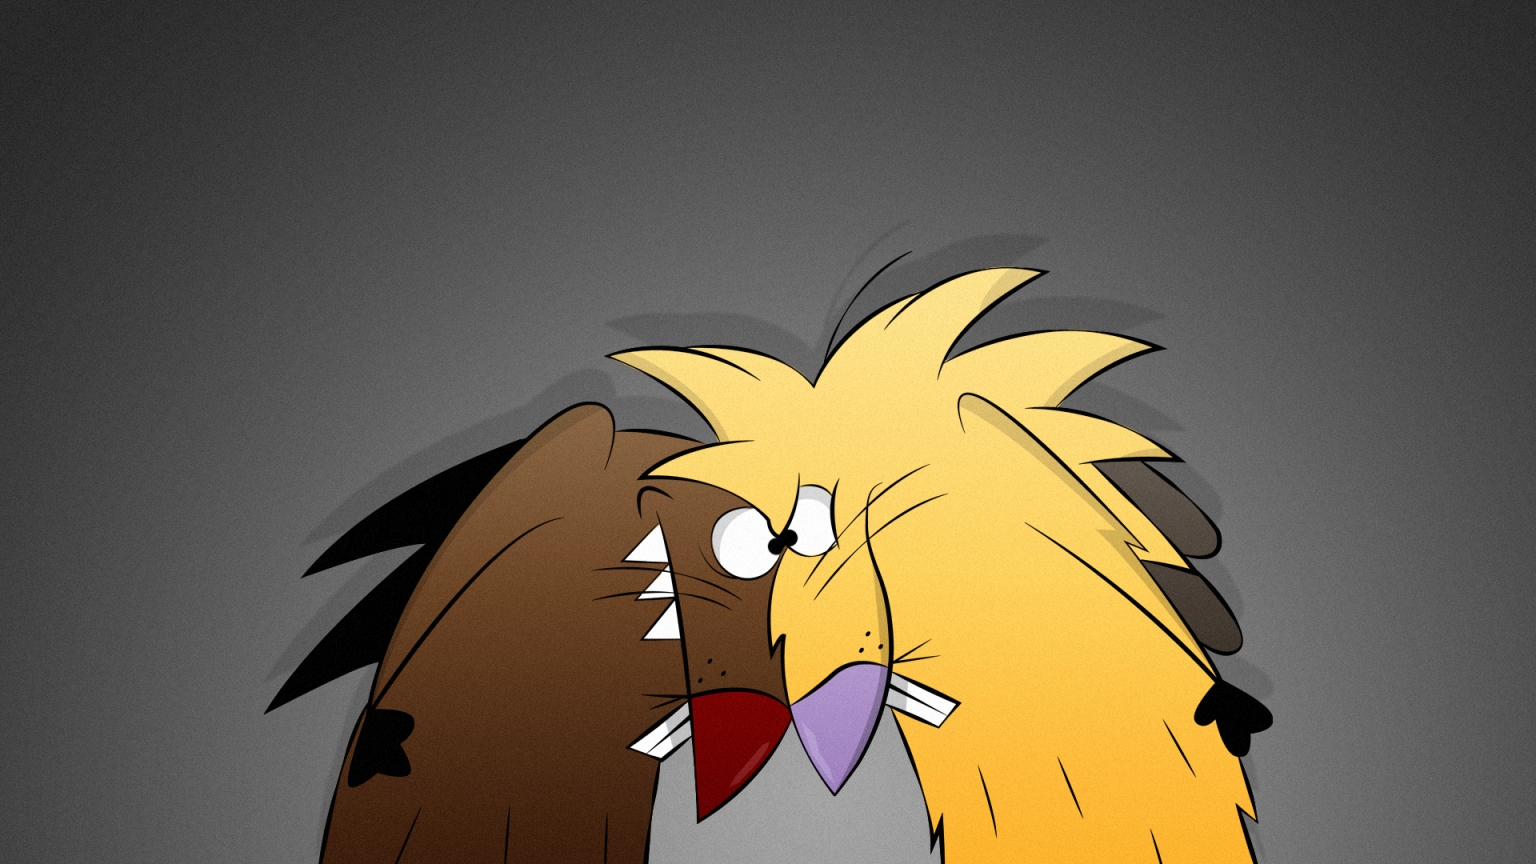 The Angry Beavers for 1536 x 864 HDTV resolution